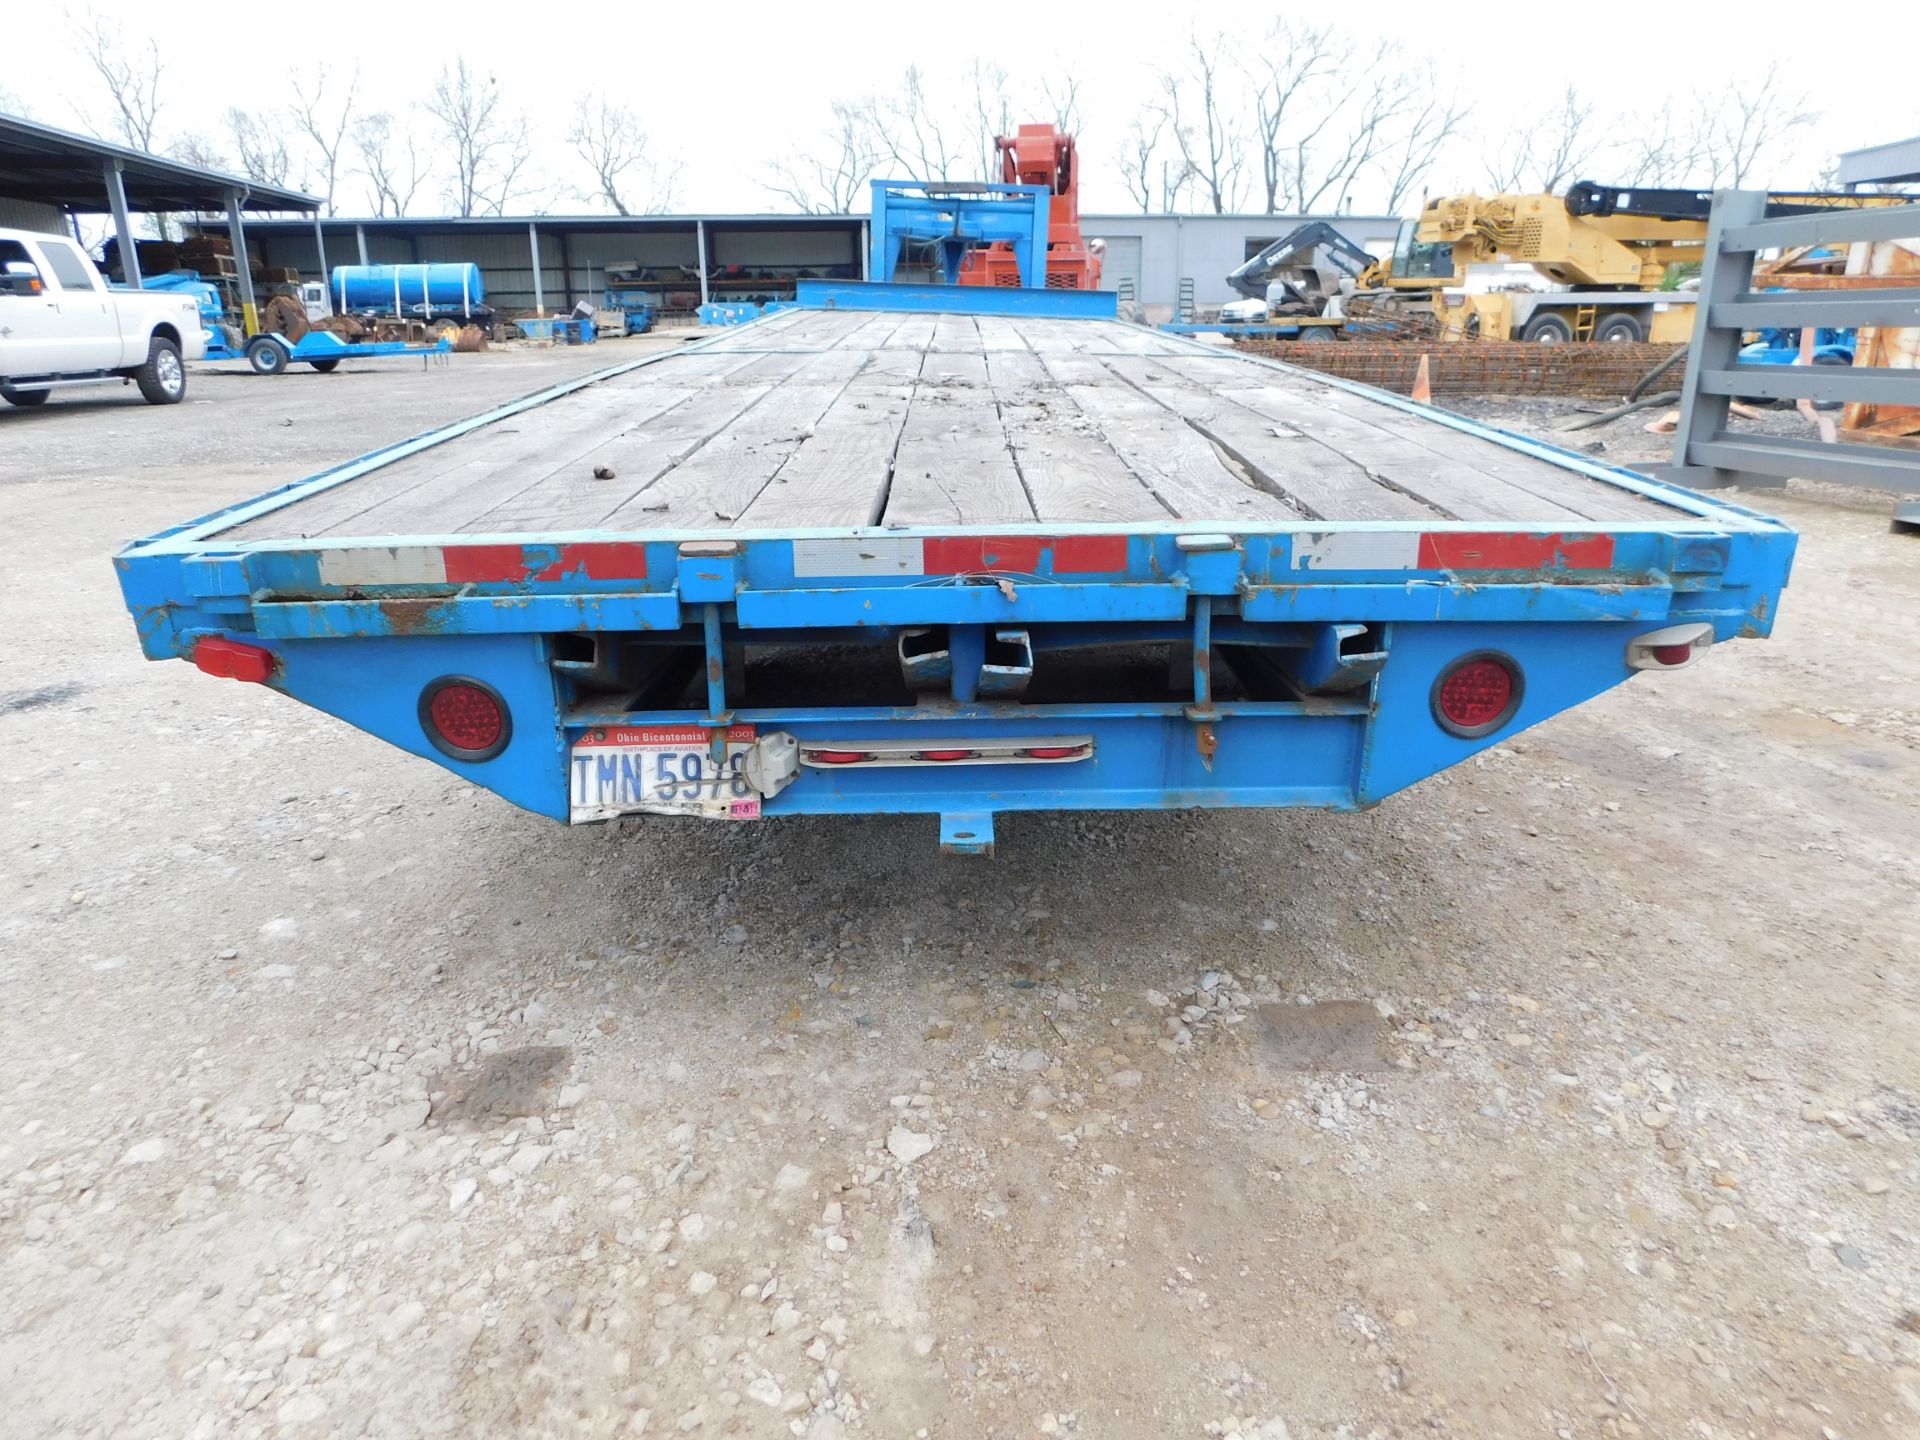 Gooseneck Trailer, Tandem Axle with Duals, 8' Wide x 26' Long, Wood Deck - Image 10 of 17